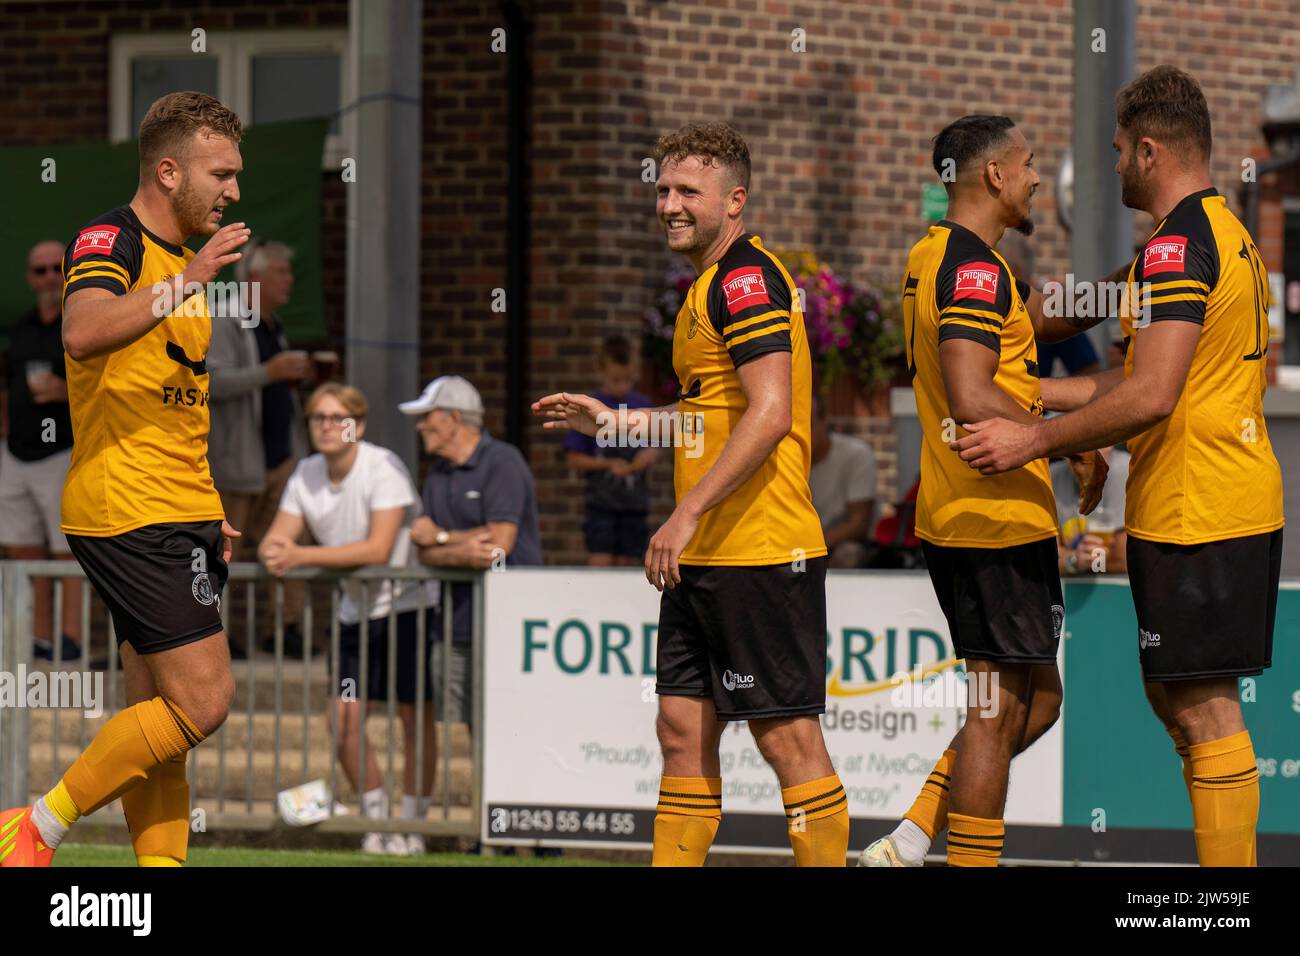 Football match action from Bognor Regis Town FC vs Cray Wanderers - FA Cup game. Four players smile and congratulate each other after scoring a goal Stock Photo